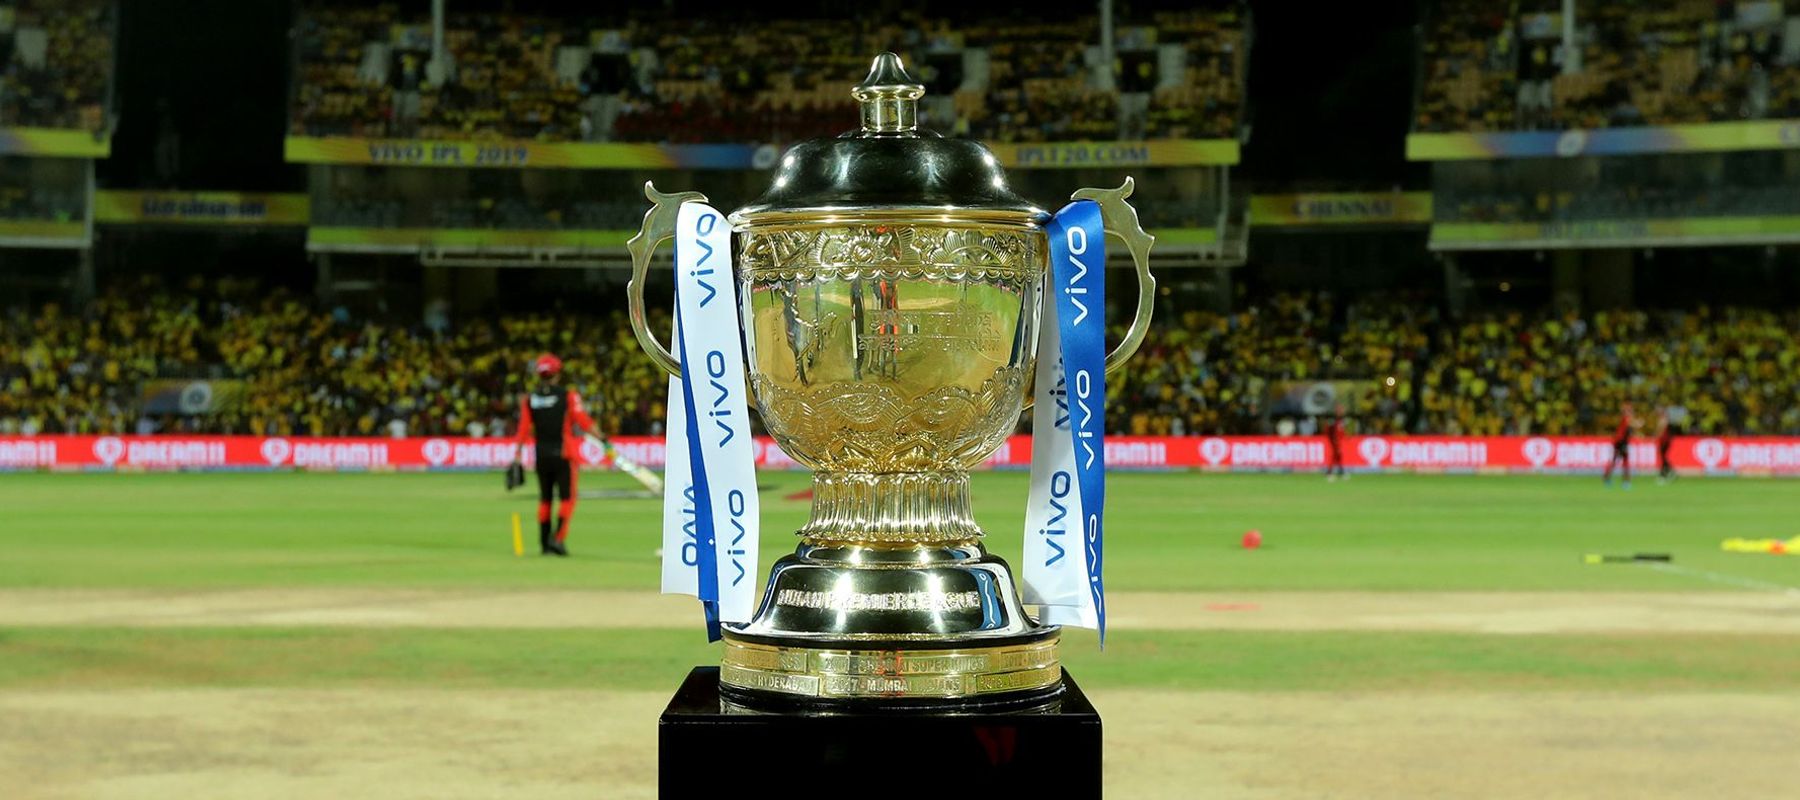 BCCI and Vivo agrees to suspend their partnership for IPL 2020